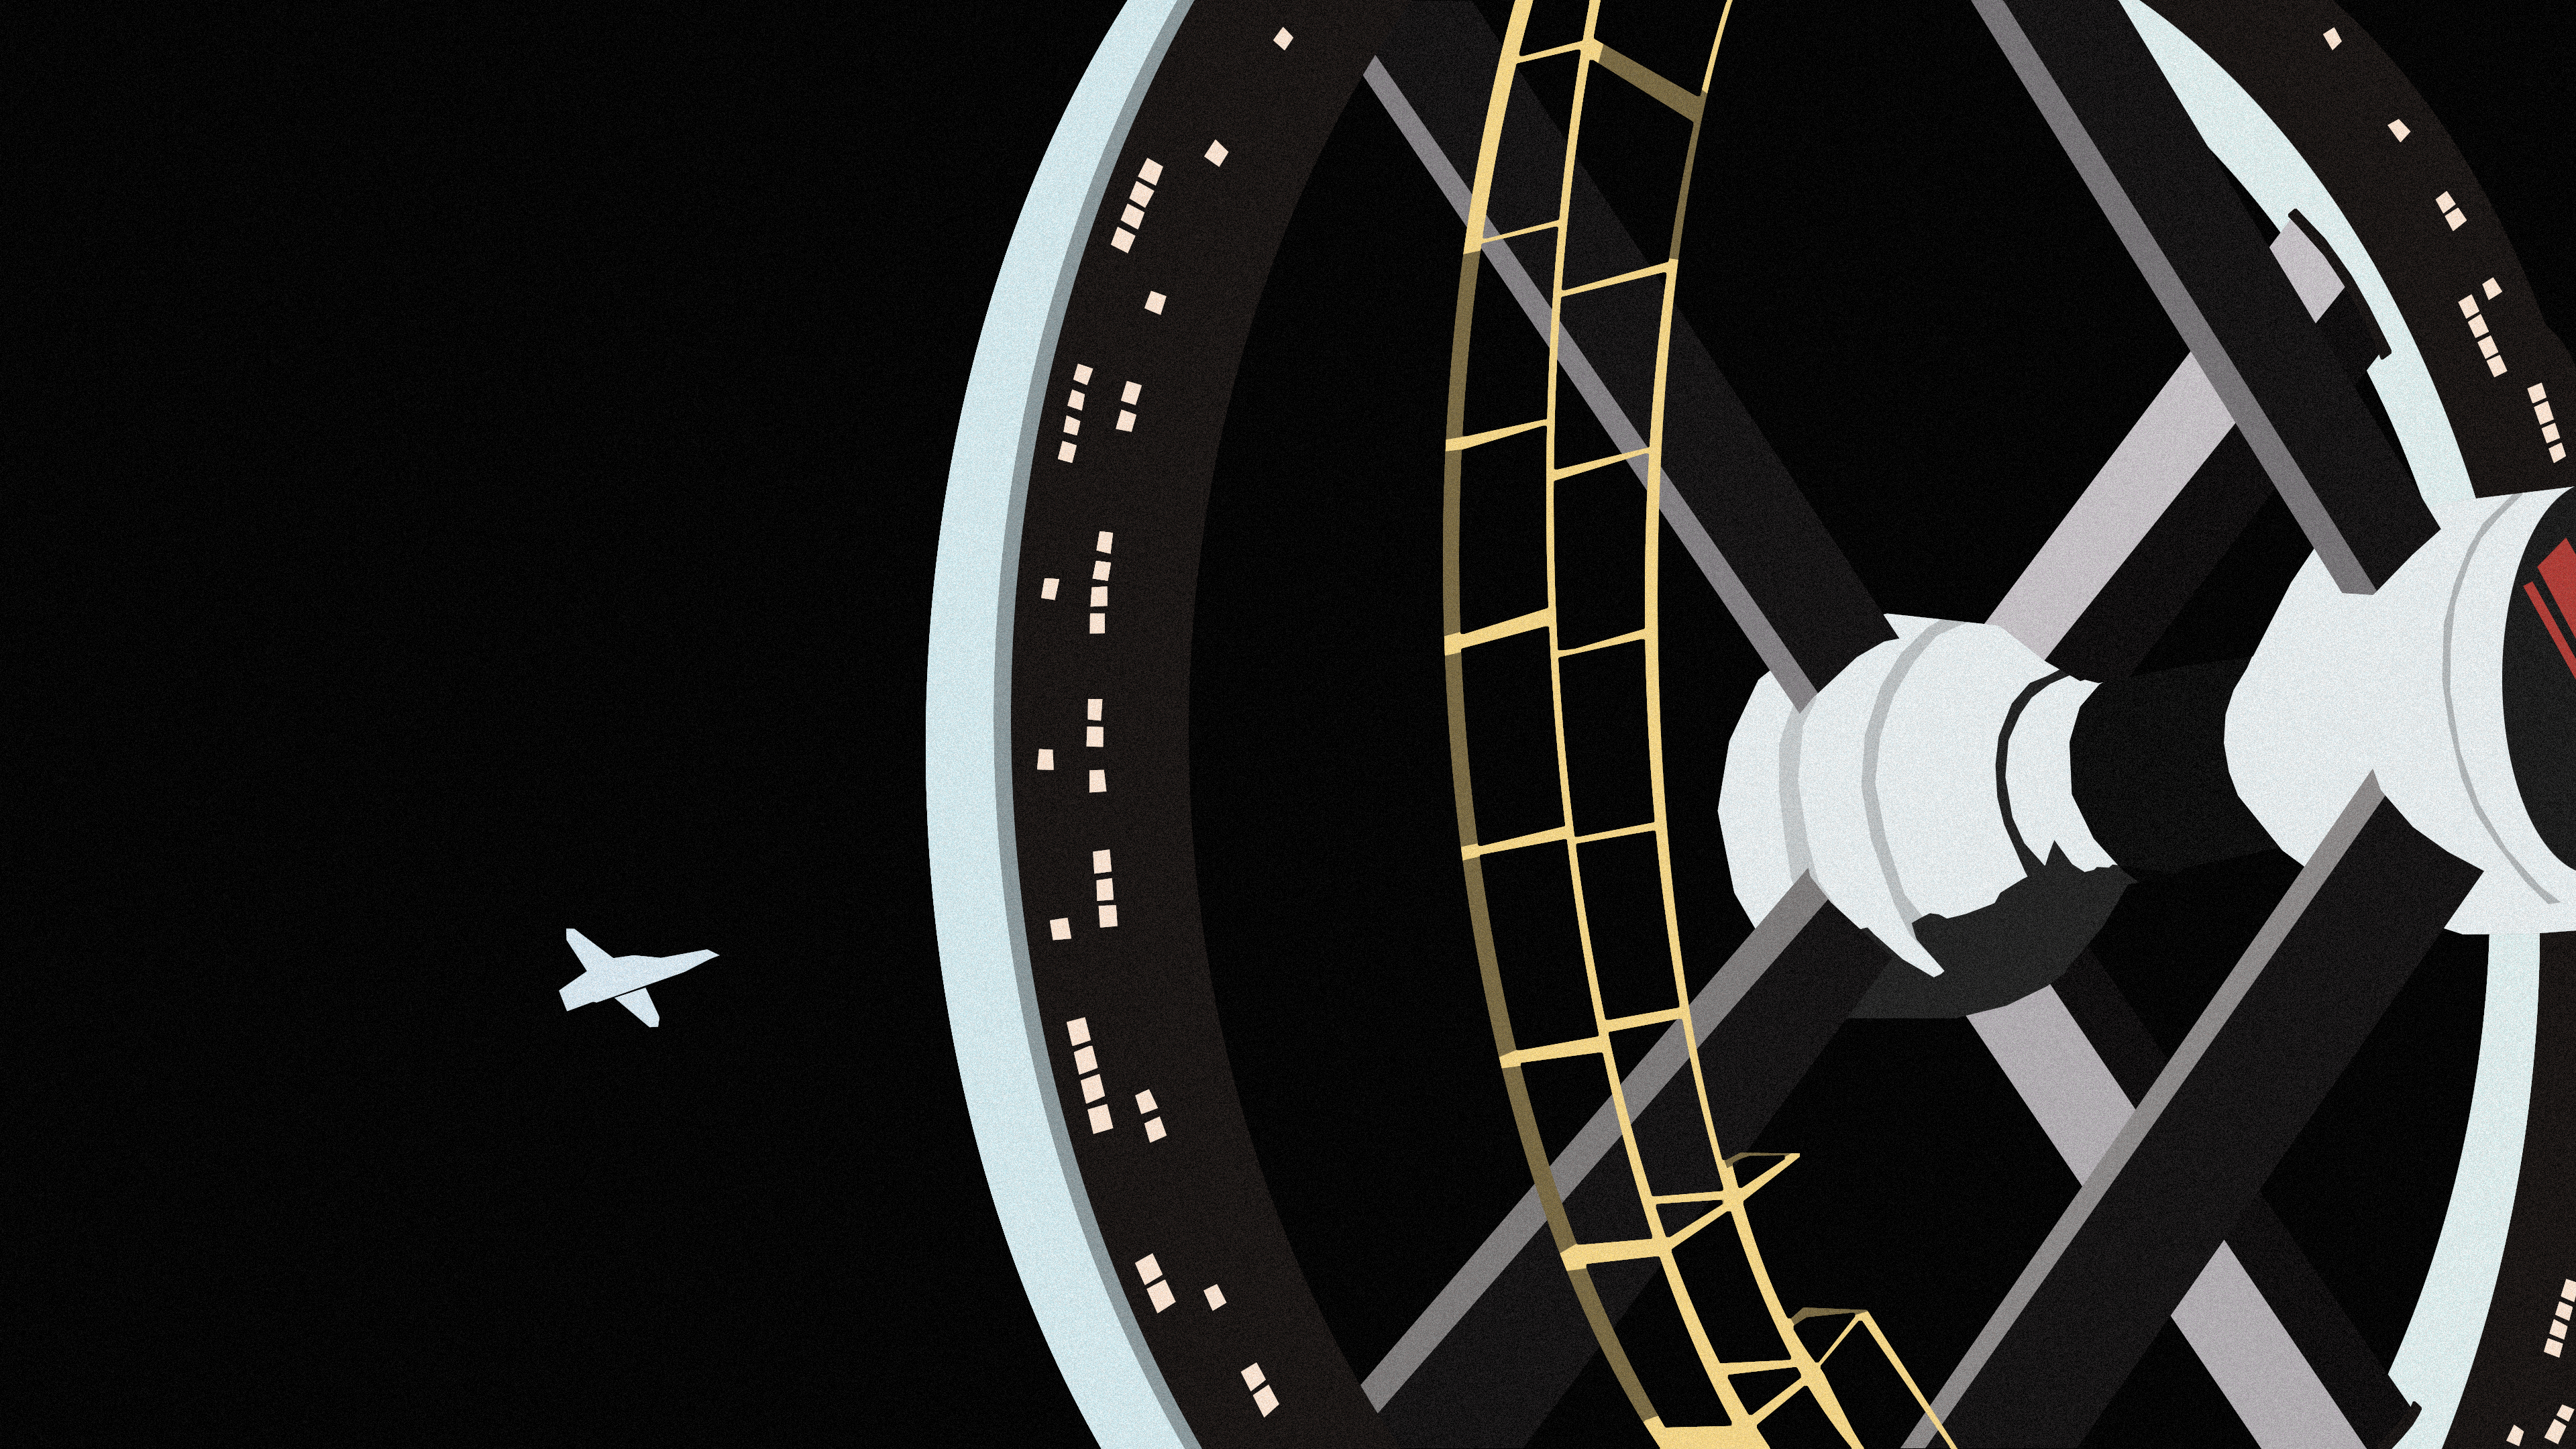 2001 A Space Odyssey Digital Art Science Fiction Movies Spacestation Space Spaceship Fan Art 3840x2160